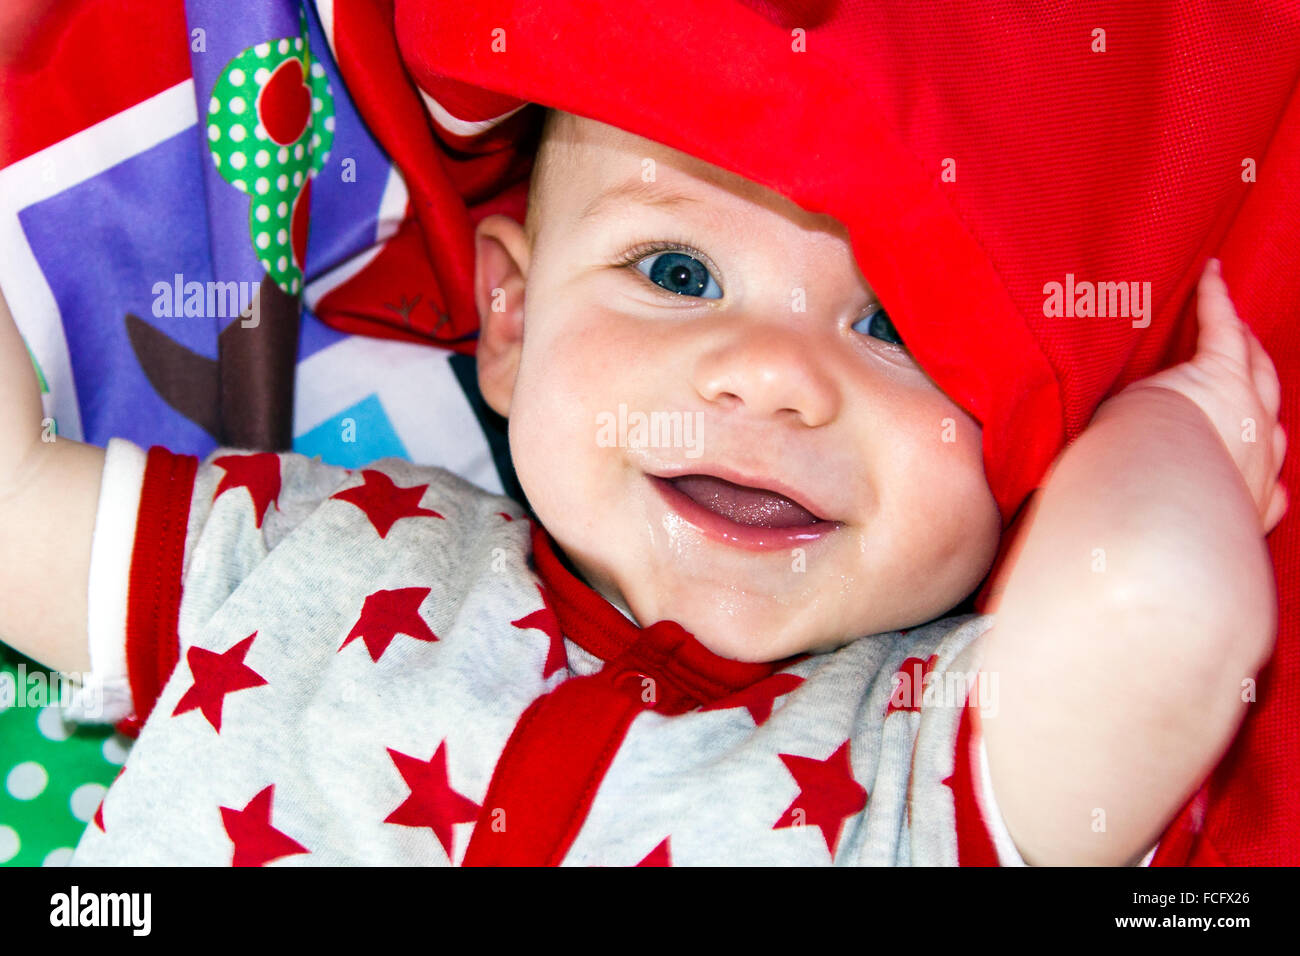 Baby smiling and wrapping himself in his play mat Stock Photo